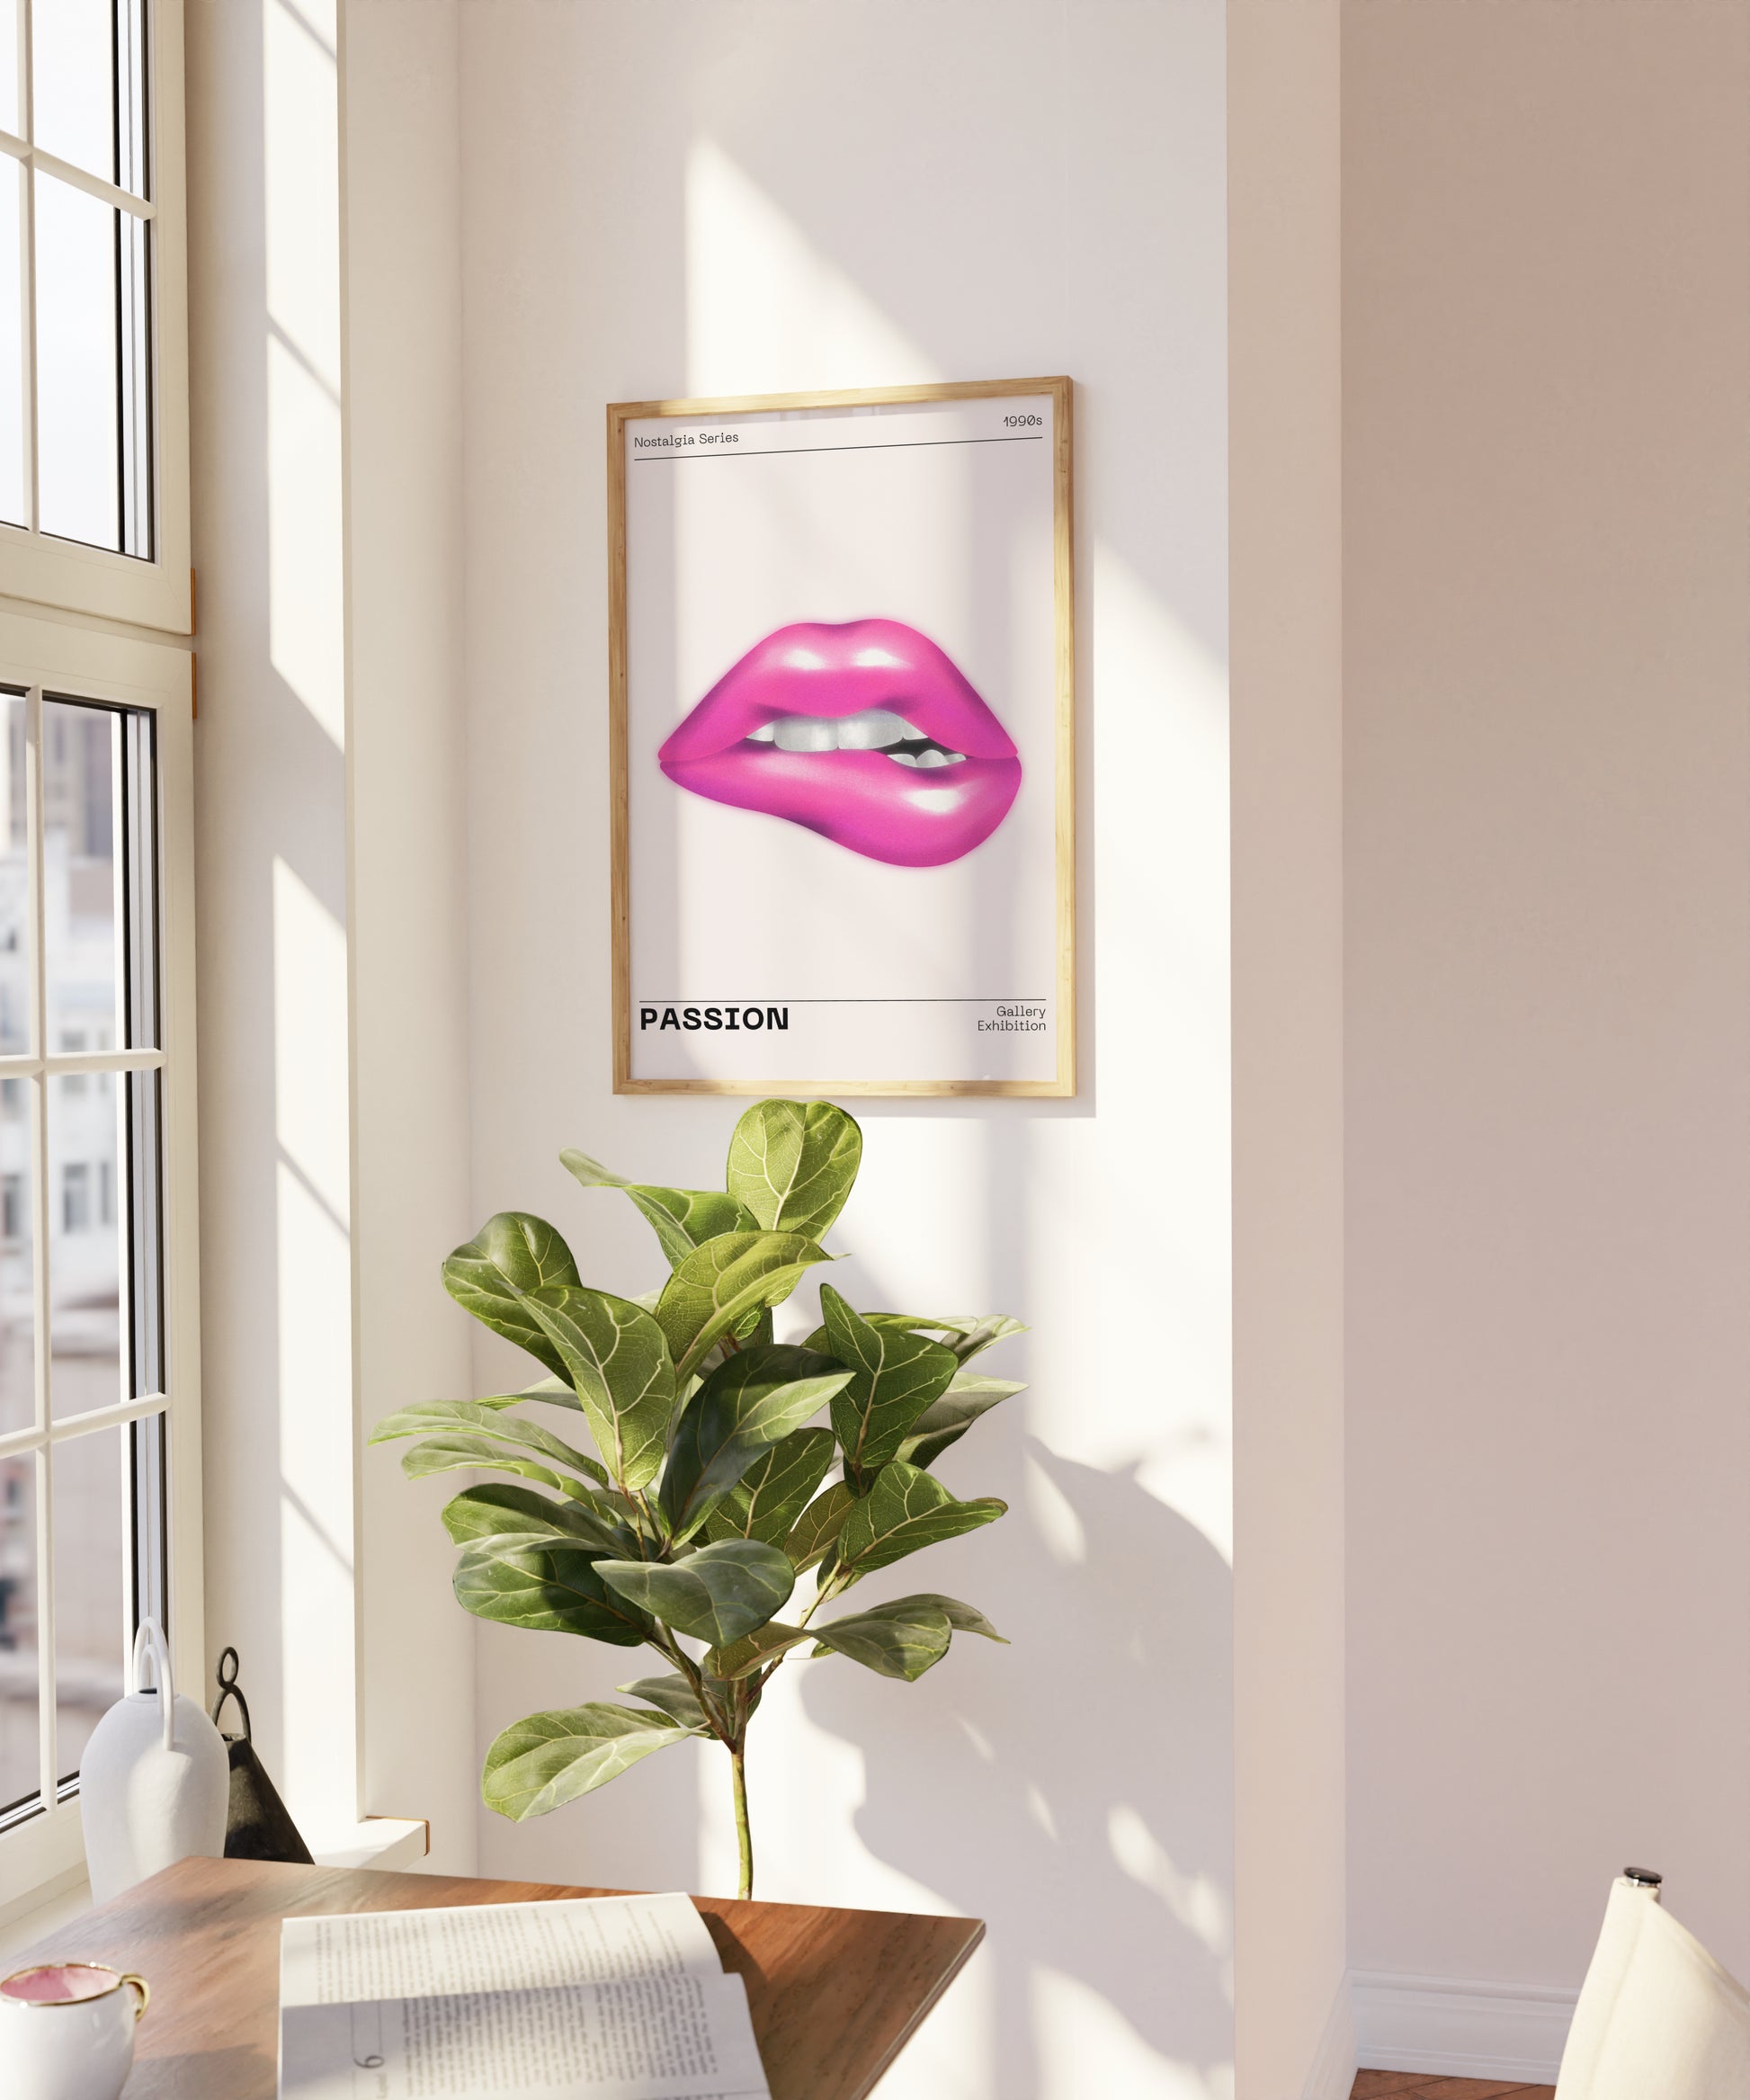 Passion Wall Art, 90s Funky Playful Poster, Pink Lips Illustration ...